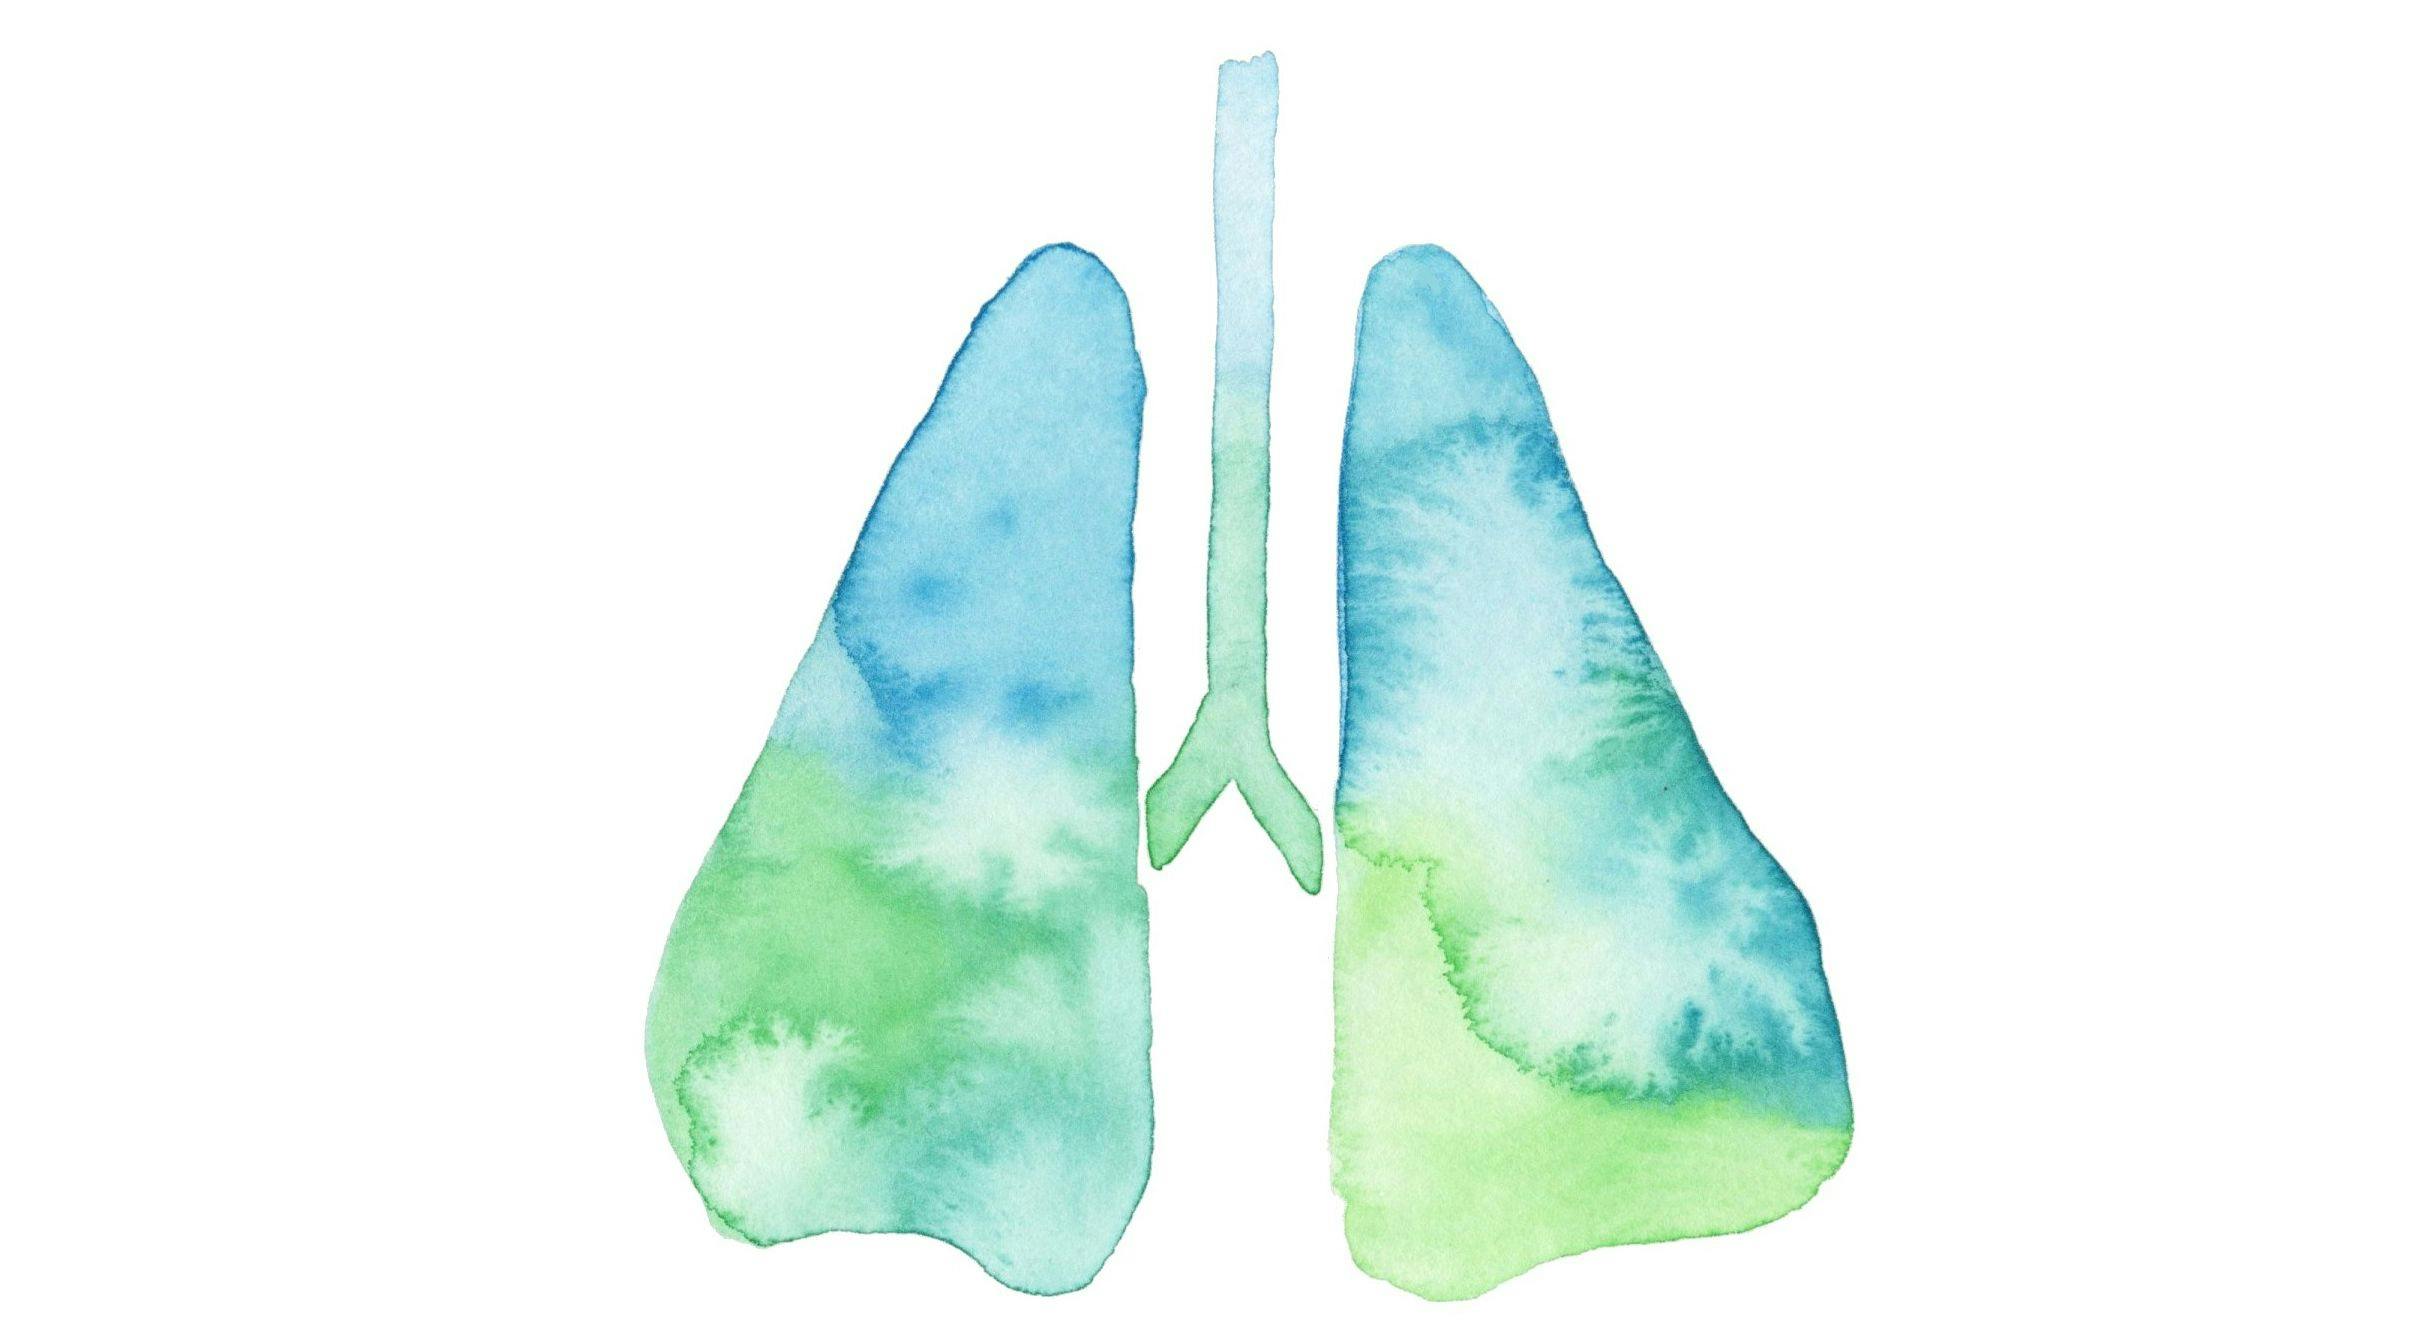 TKI Drug Plus Chemotherapy May Improve Lung Cancer Outcomes